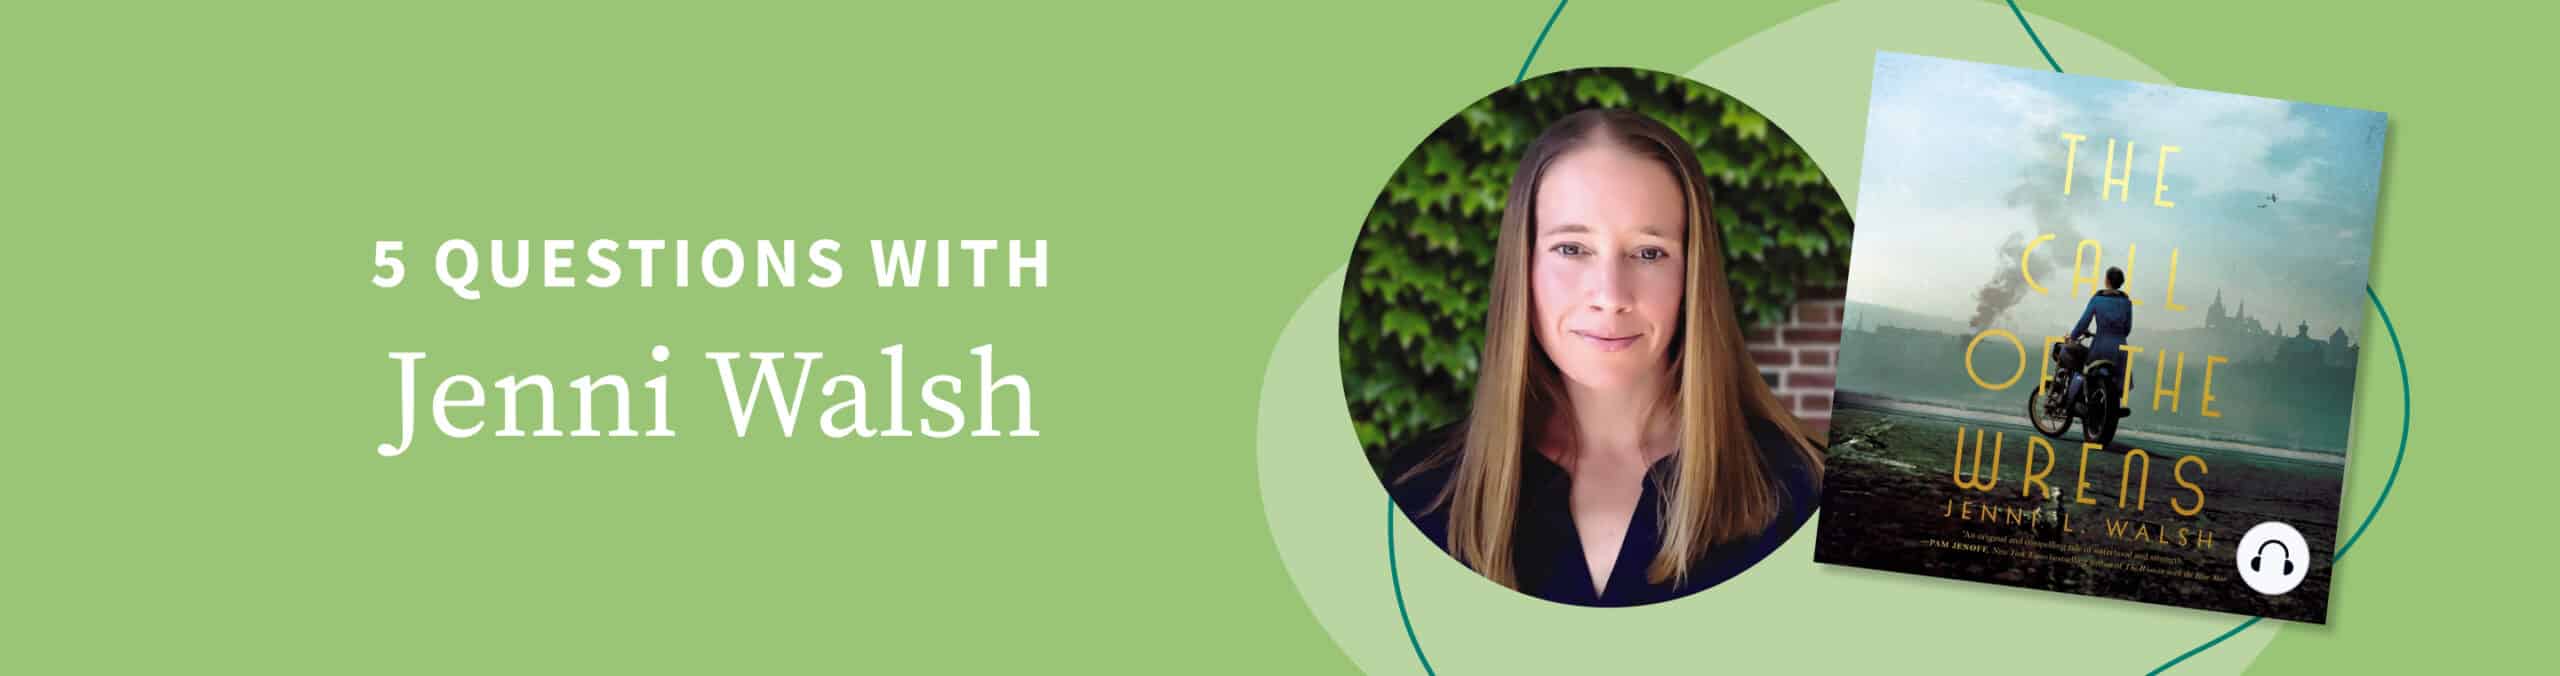 5 Questions with Jenni Walsh